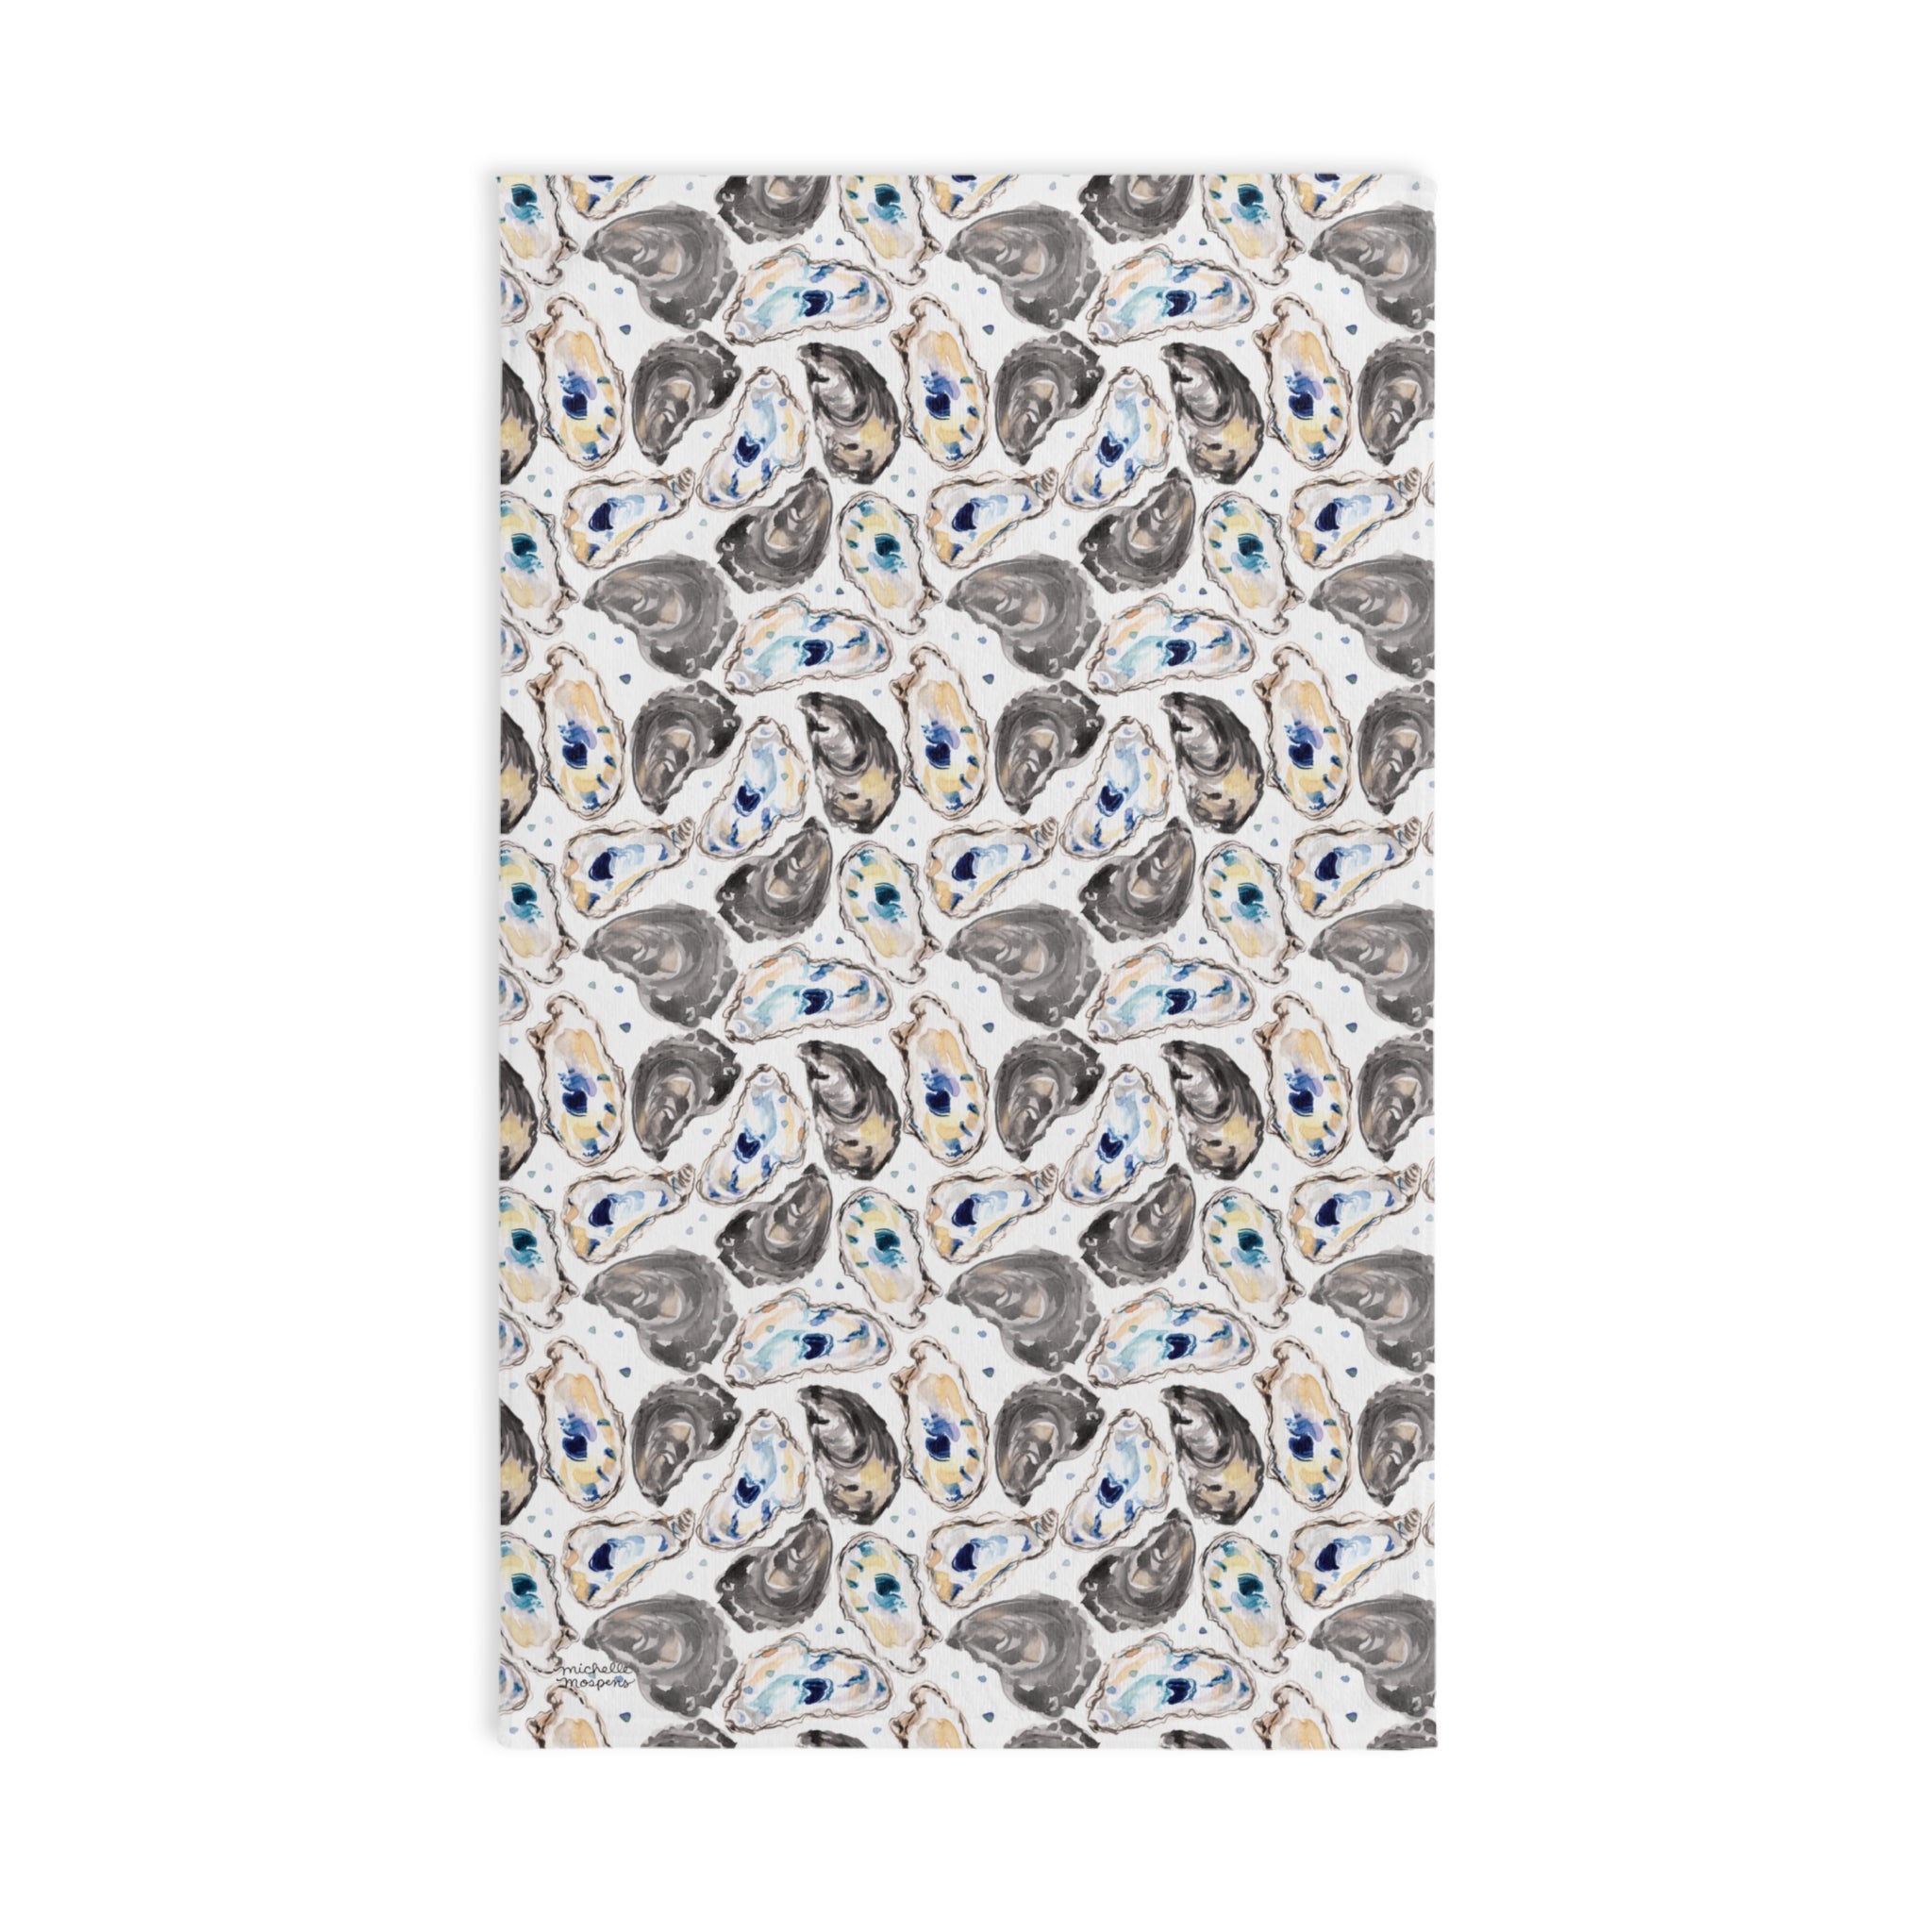 Watercolor Oyster Shells Designer Kitchen Towel by Michelle Mospens | Luxury Dish Towel